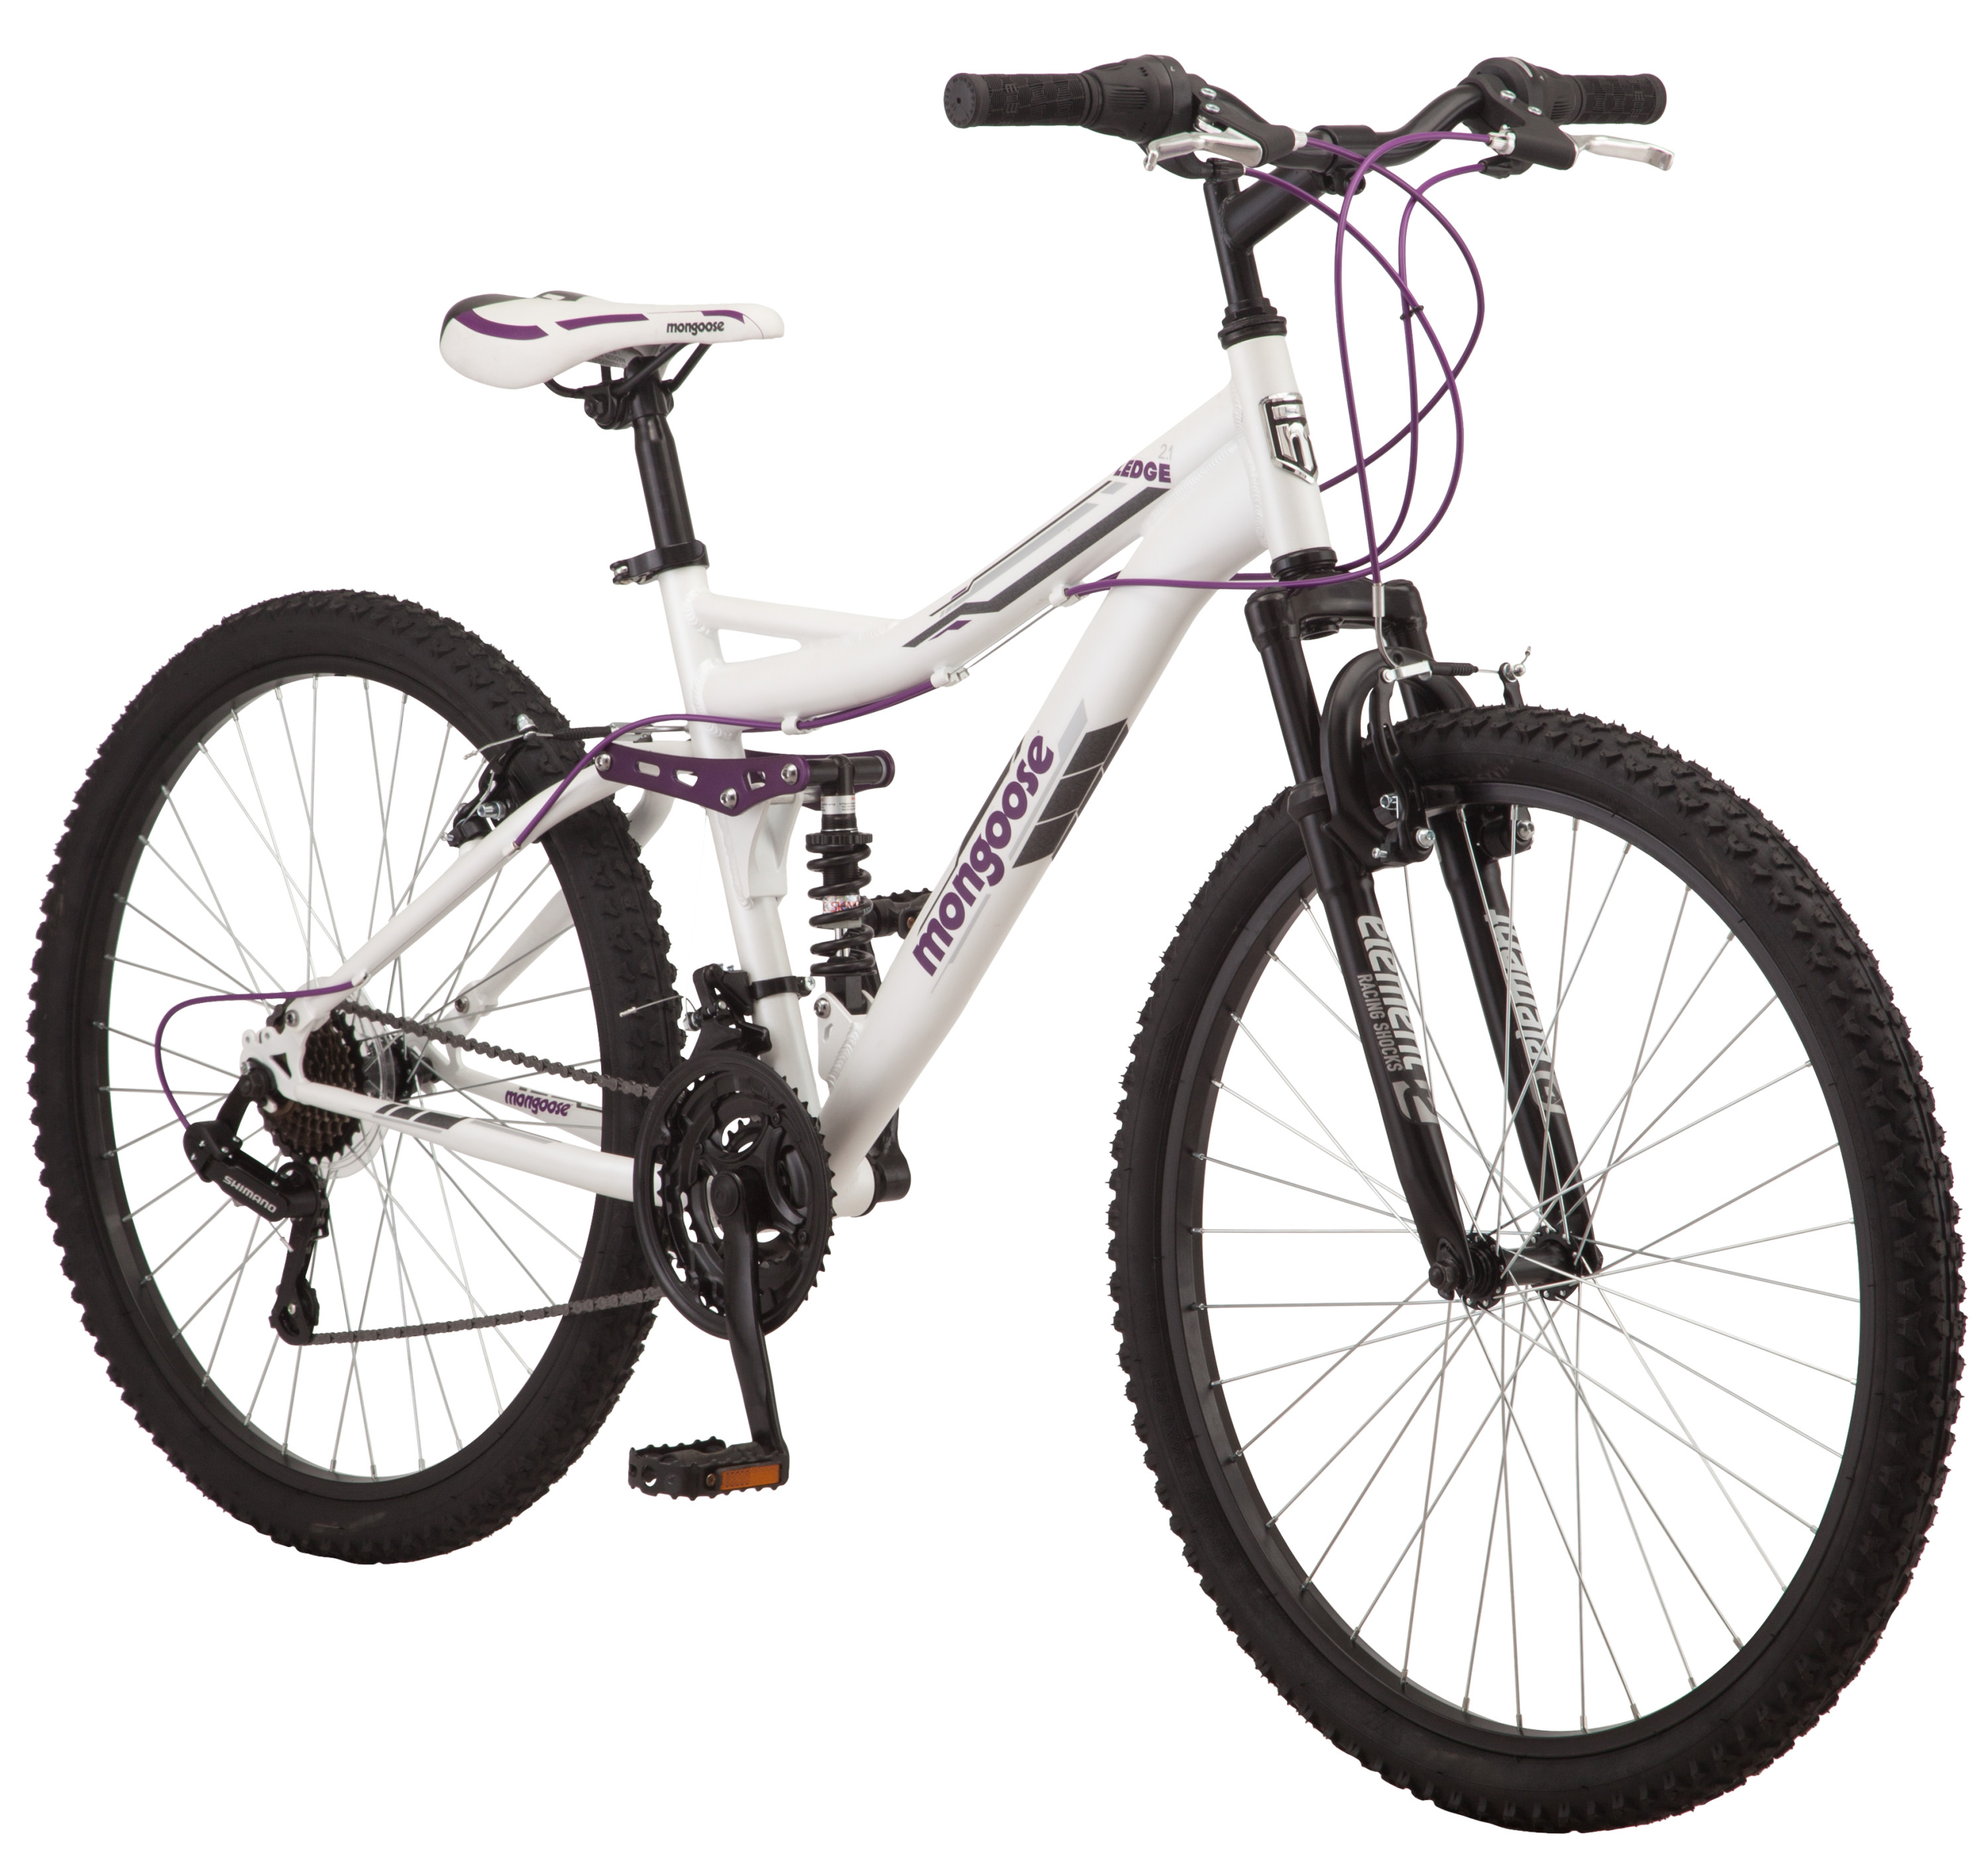 LLJEkieee 26 Inch 21-Speed Mountain Bike Bicycle Adult Student Outdoors White